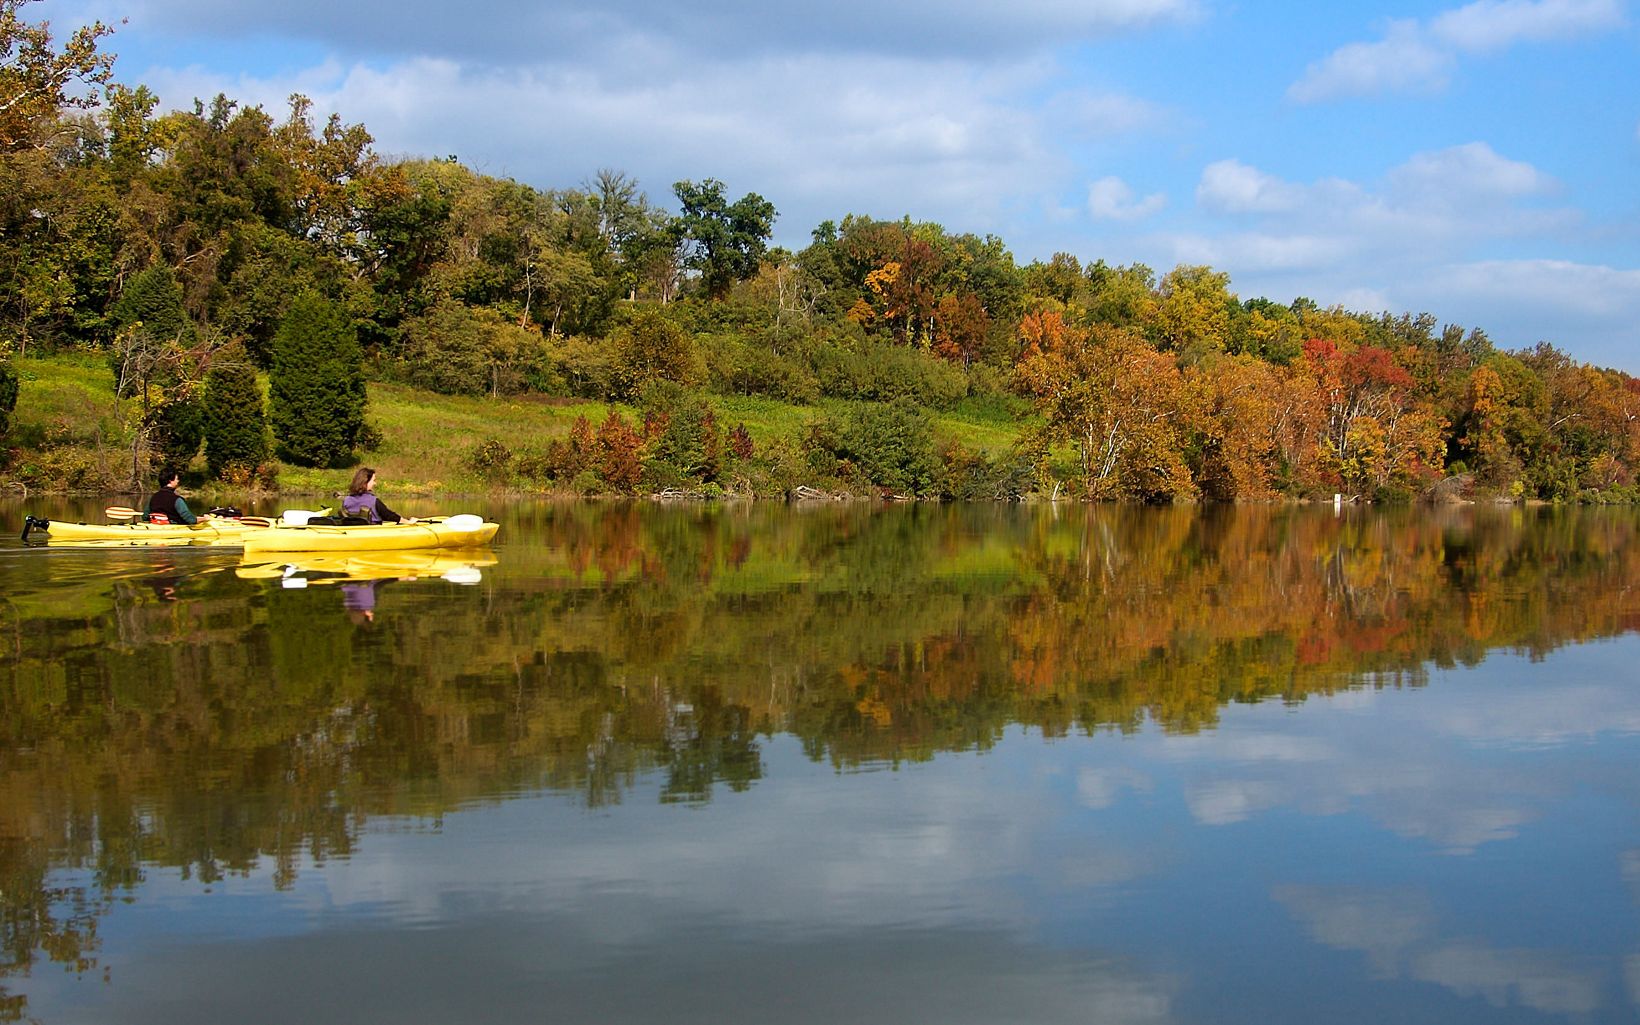 Two people float together in yellow kayaks on the Potomac River. The still, flat water reflects the trees that line the bank. The leaves are just beginning to show fall color.